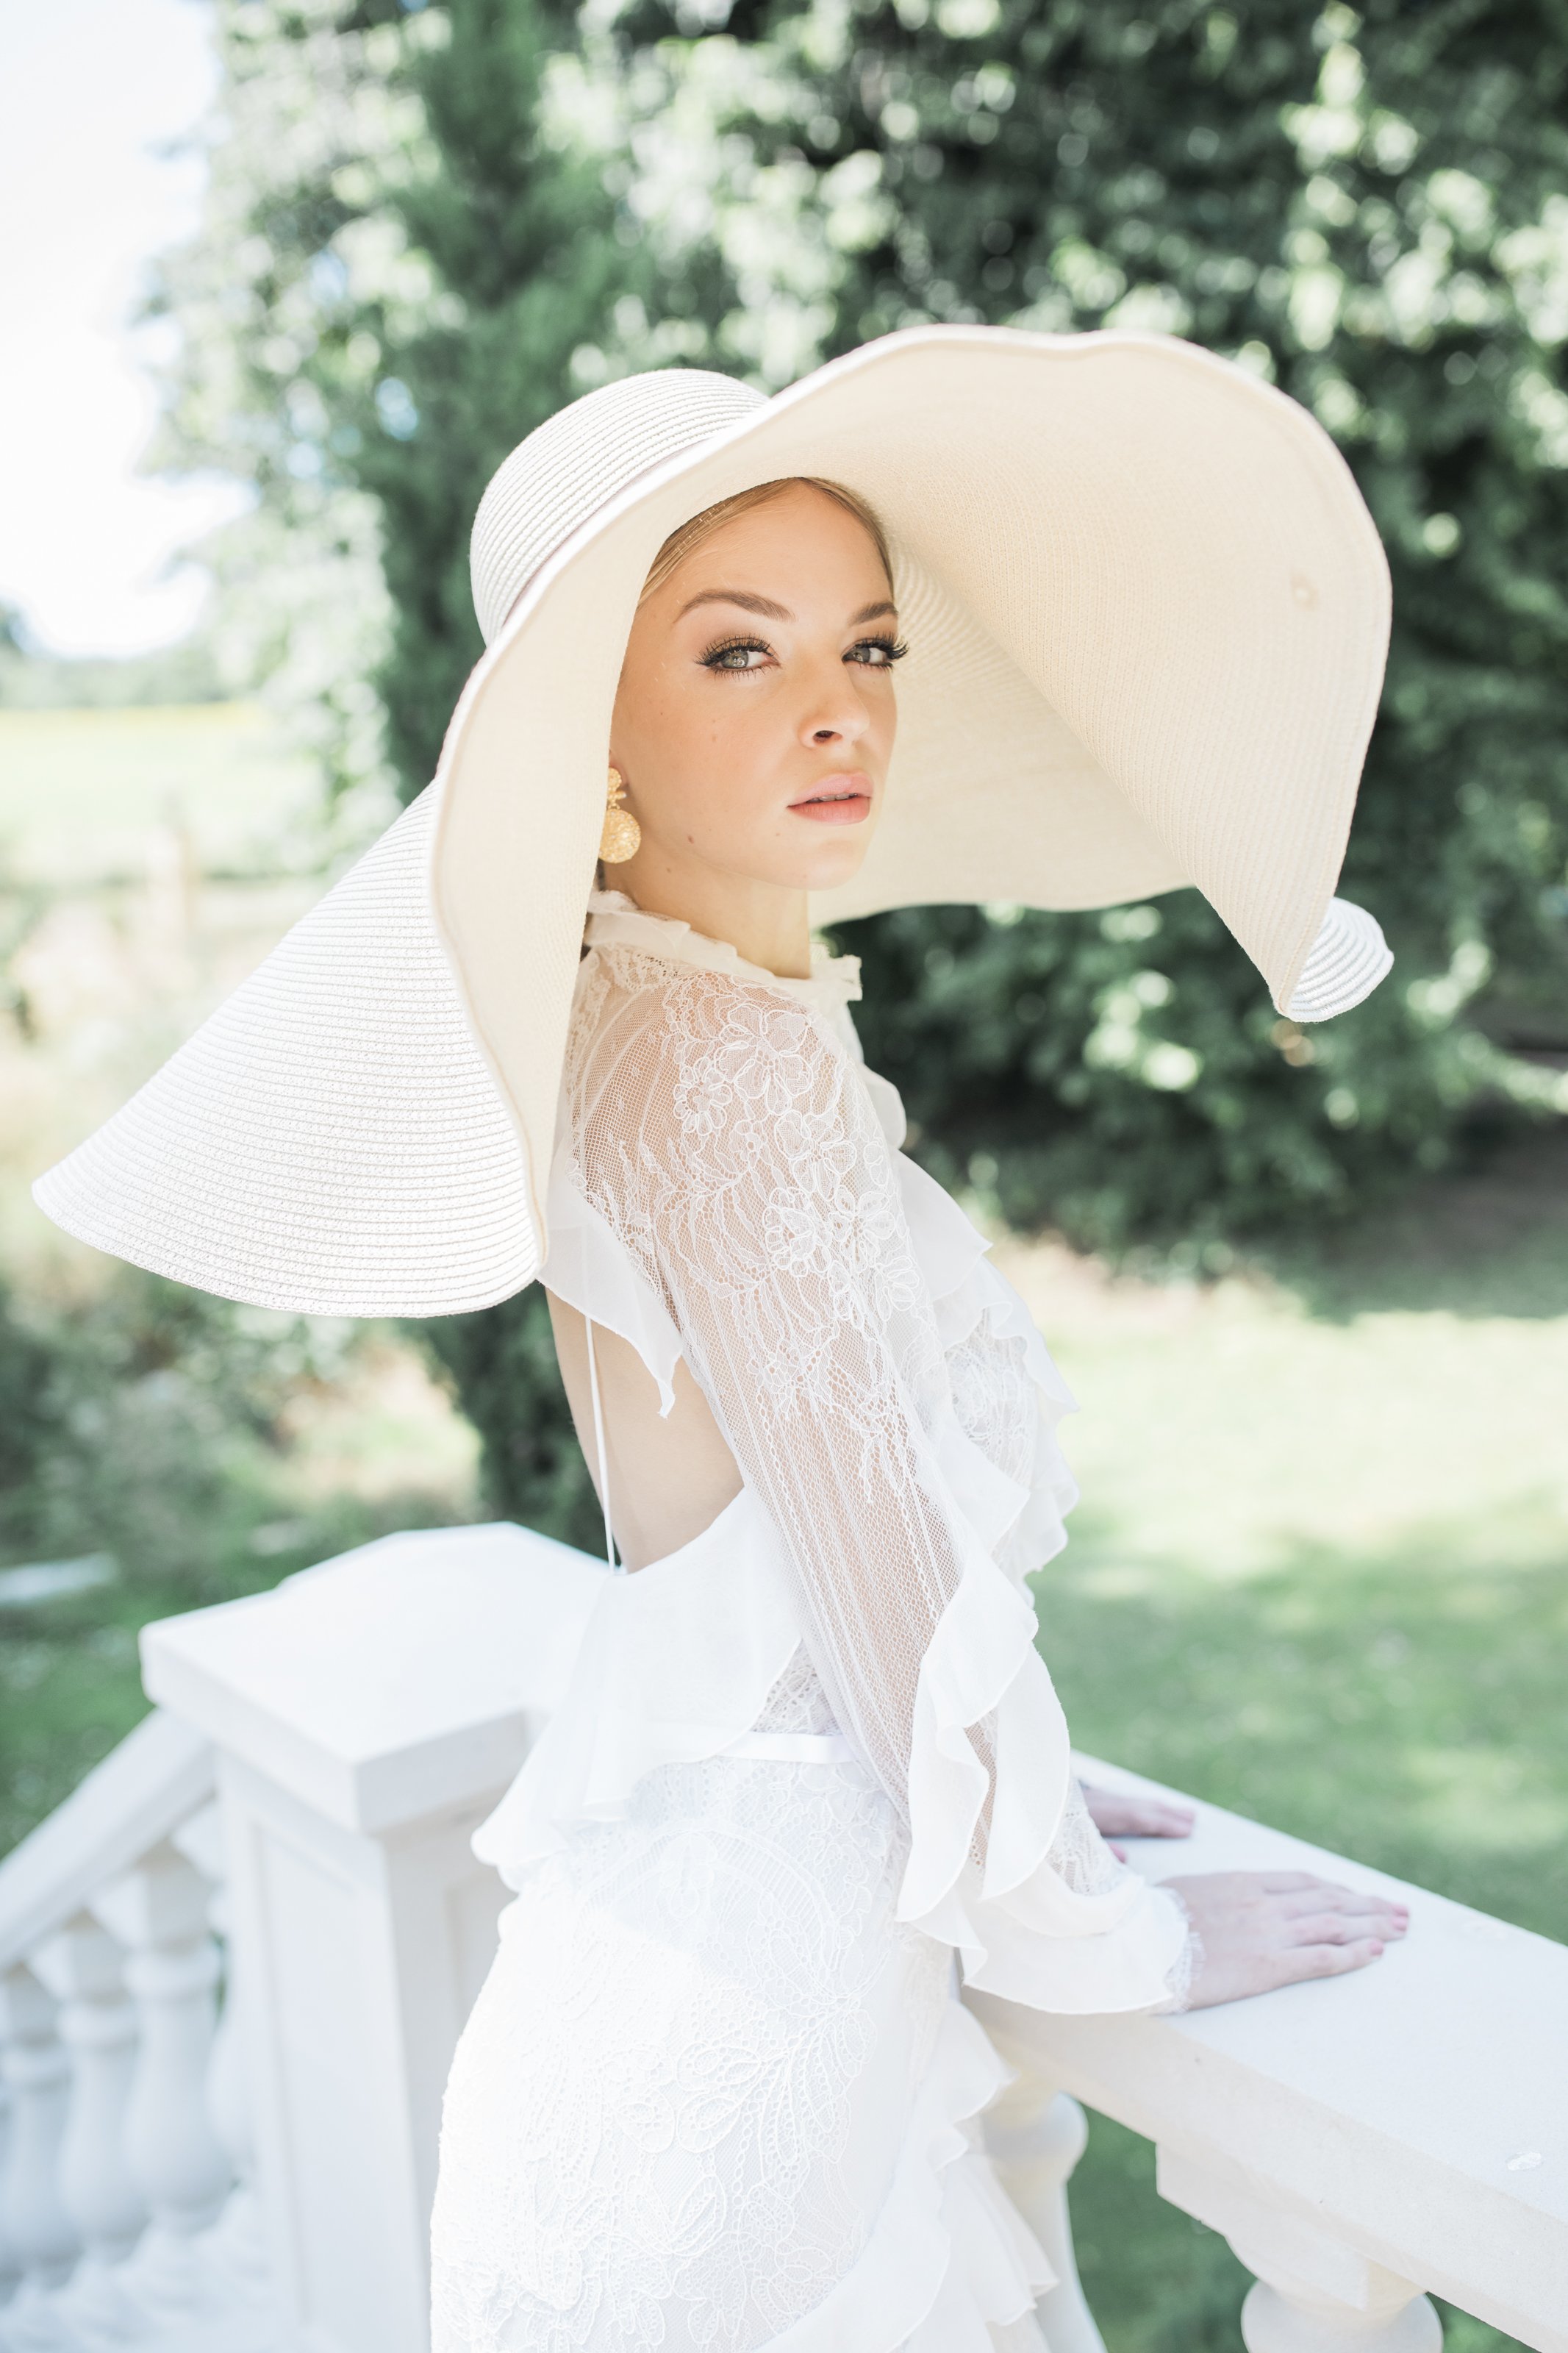 Bride with large hat at The Old Rectory Estate wedding venue